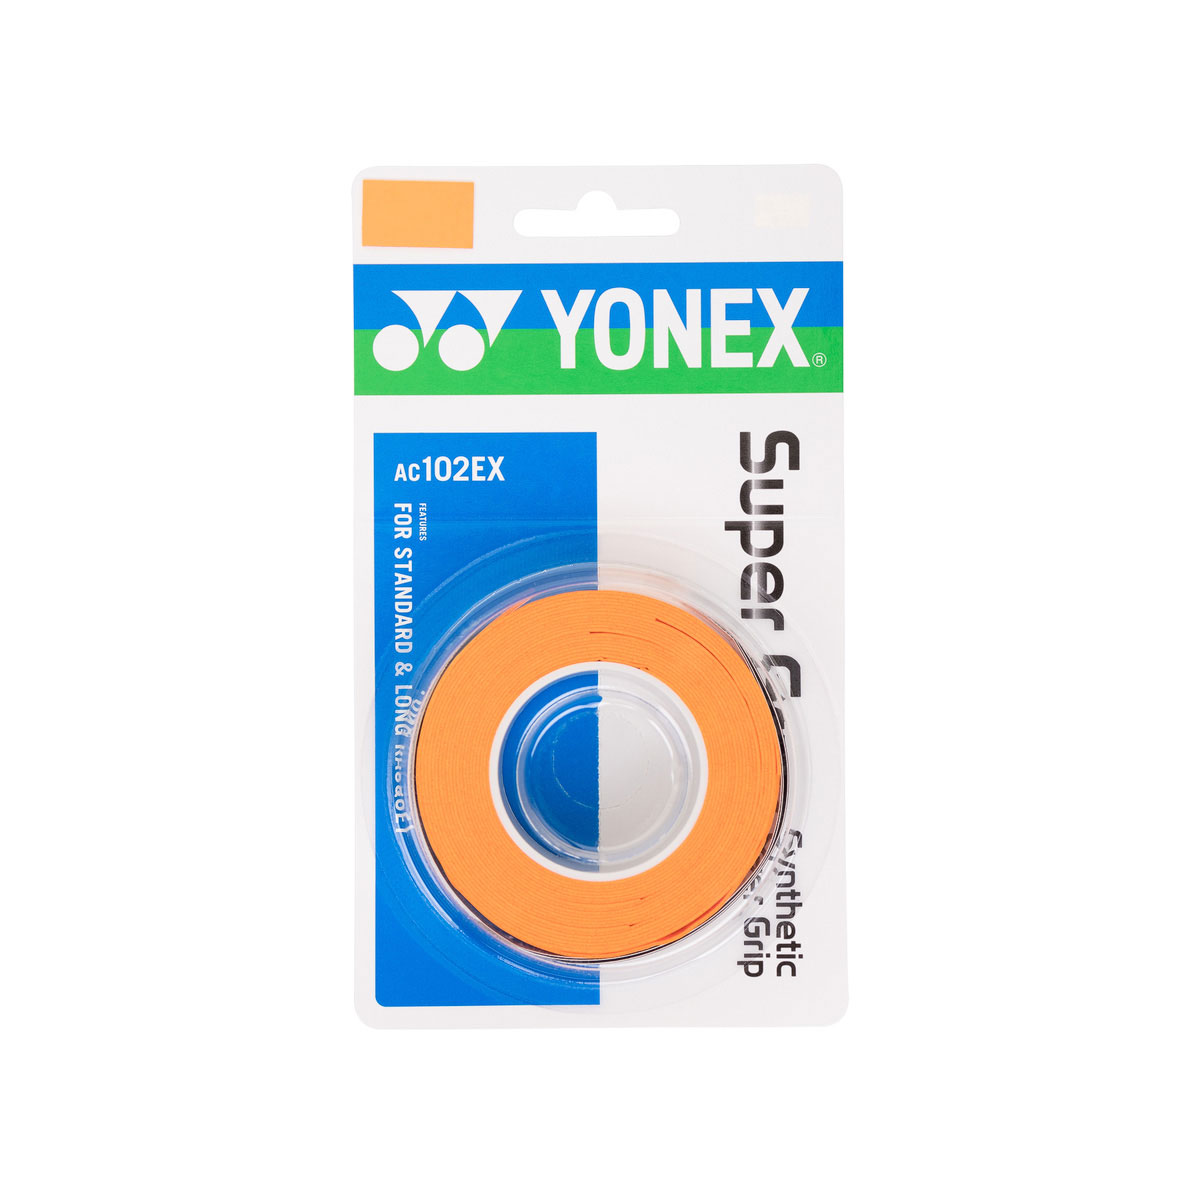 YONEX Super Grap Synthetic Over Grip 3 Stk. - Weinrot